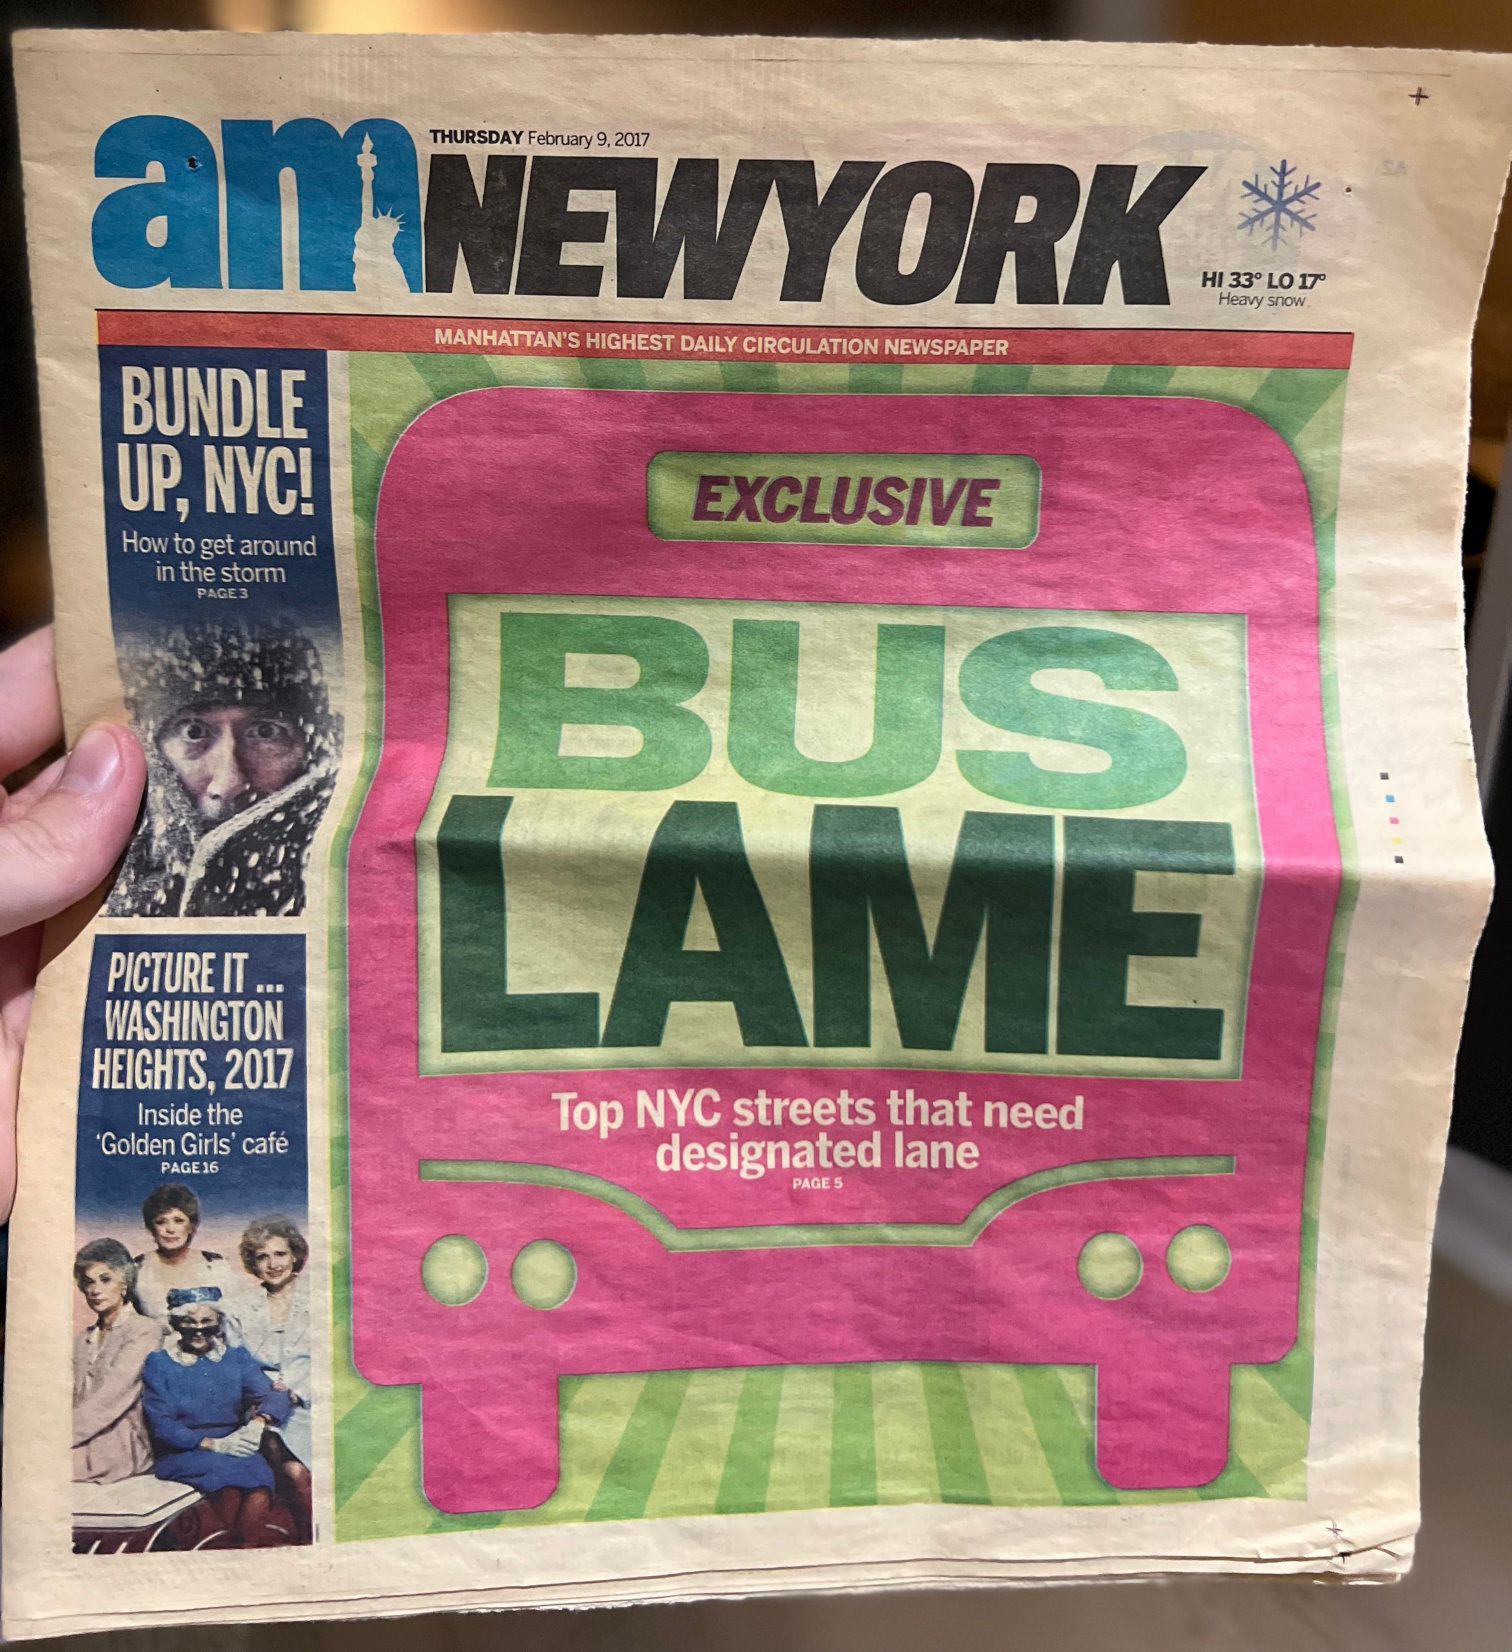 A photo of an old AM New York paper Newspaper titled "EXCLUSIVE BUS LAME"